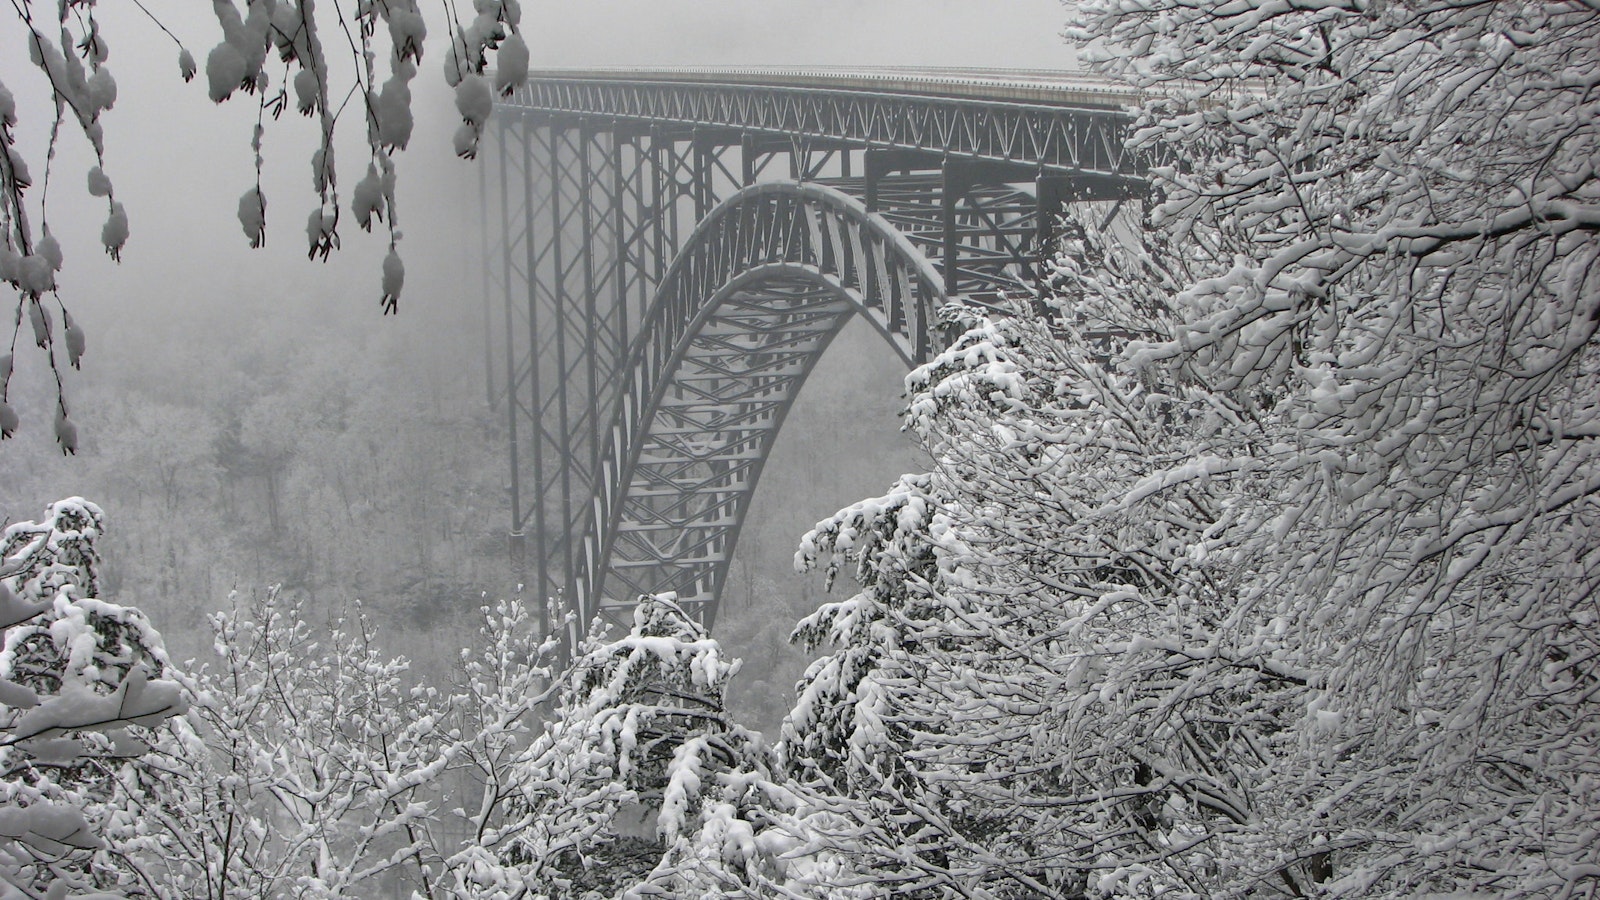 Snow covered steel bridge stretching between mountains